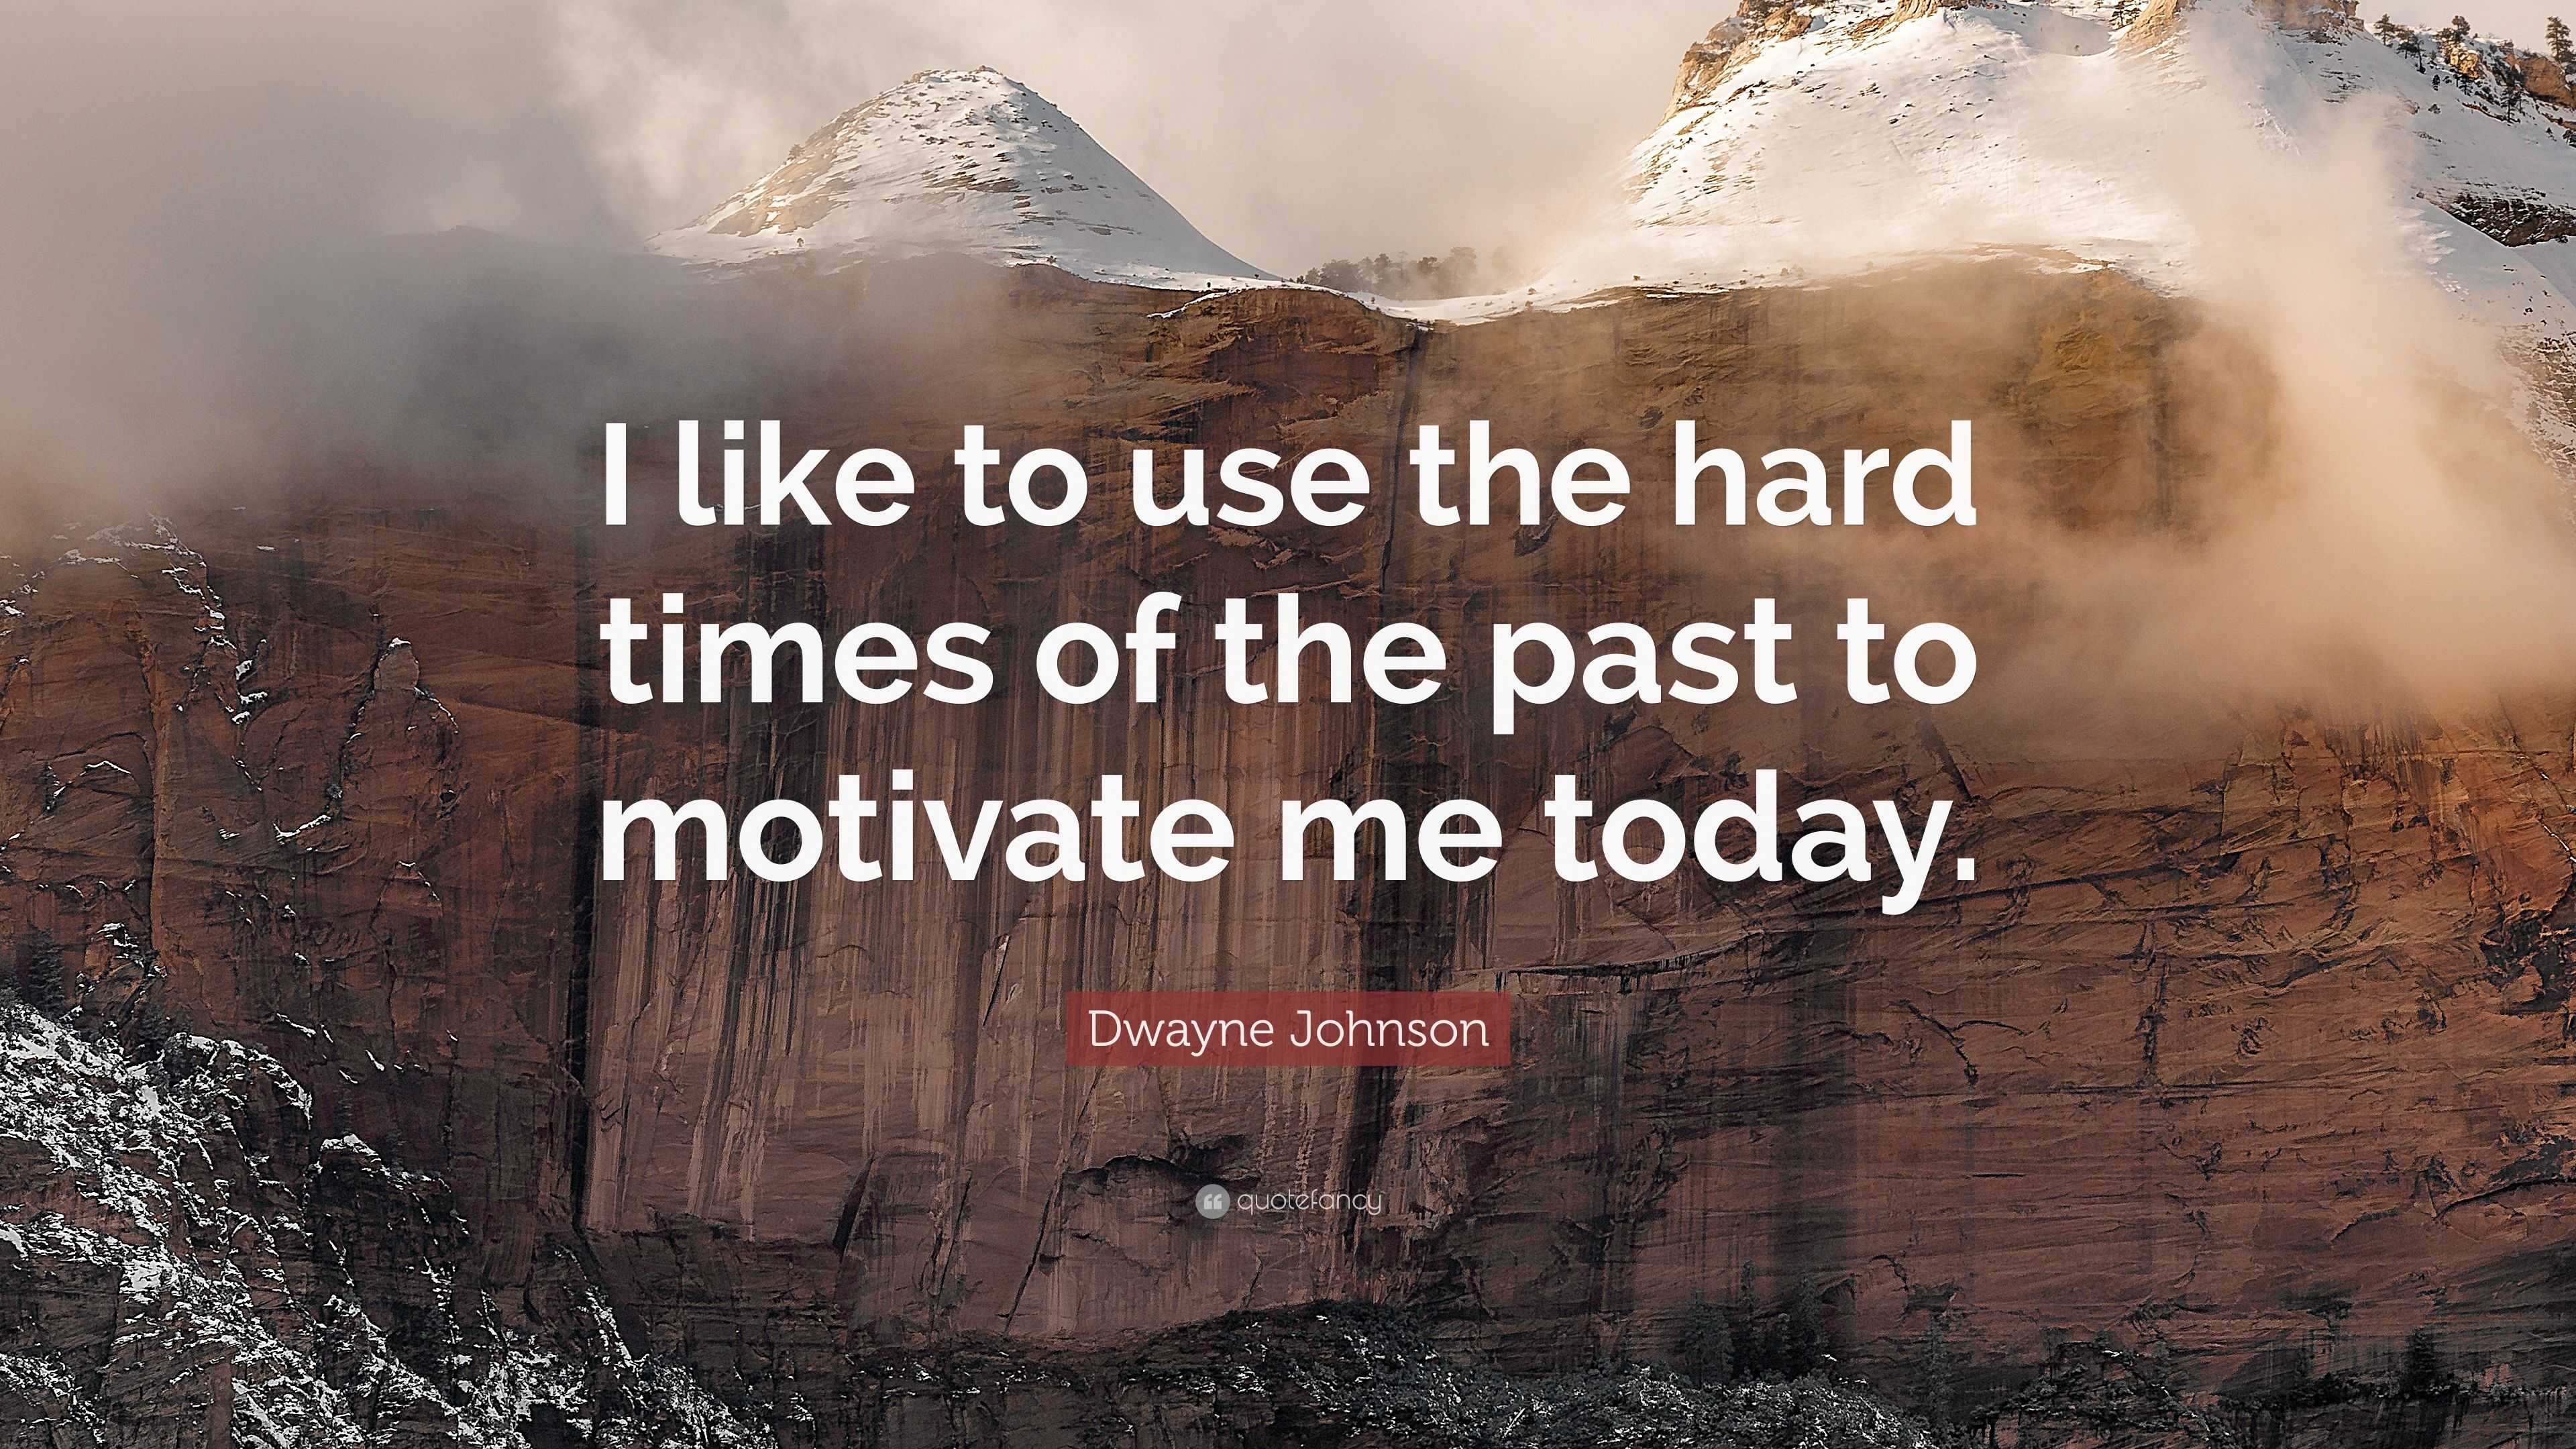 Dwayne Johnson Quote “I like to use the hard times of the past to